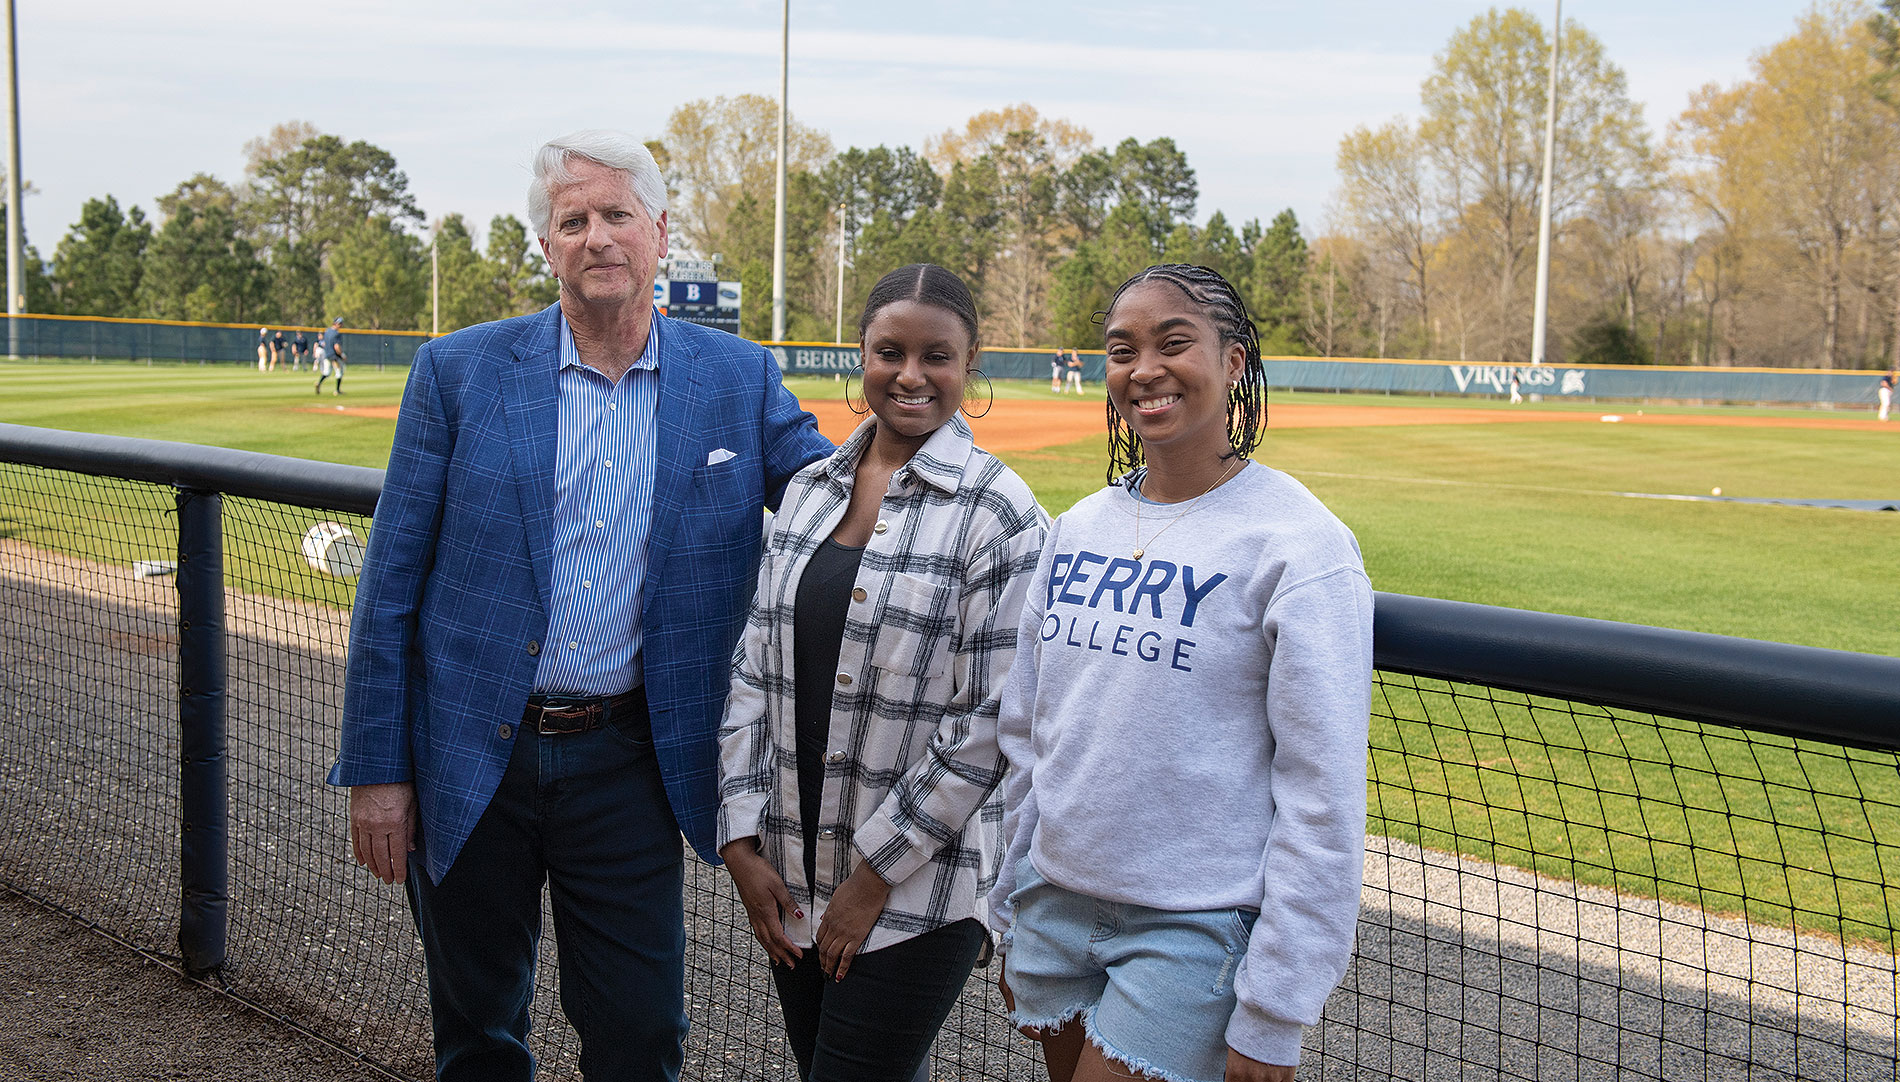 Berry Trustee Roger Lusby (79C), left, with students Ary Flowers and Nurah Williams, both of whom have benefited from scholarships he funded with wife Candy Caudill Lusby (82c) honoring baseball heroes from his childhood, Hank Aaron (Flowers) and Roberto Clemente (Williams).